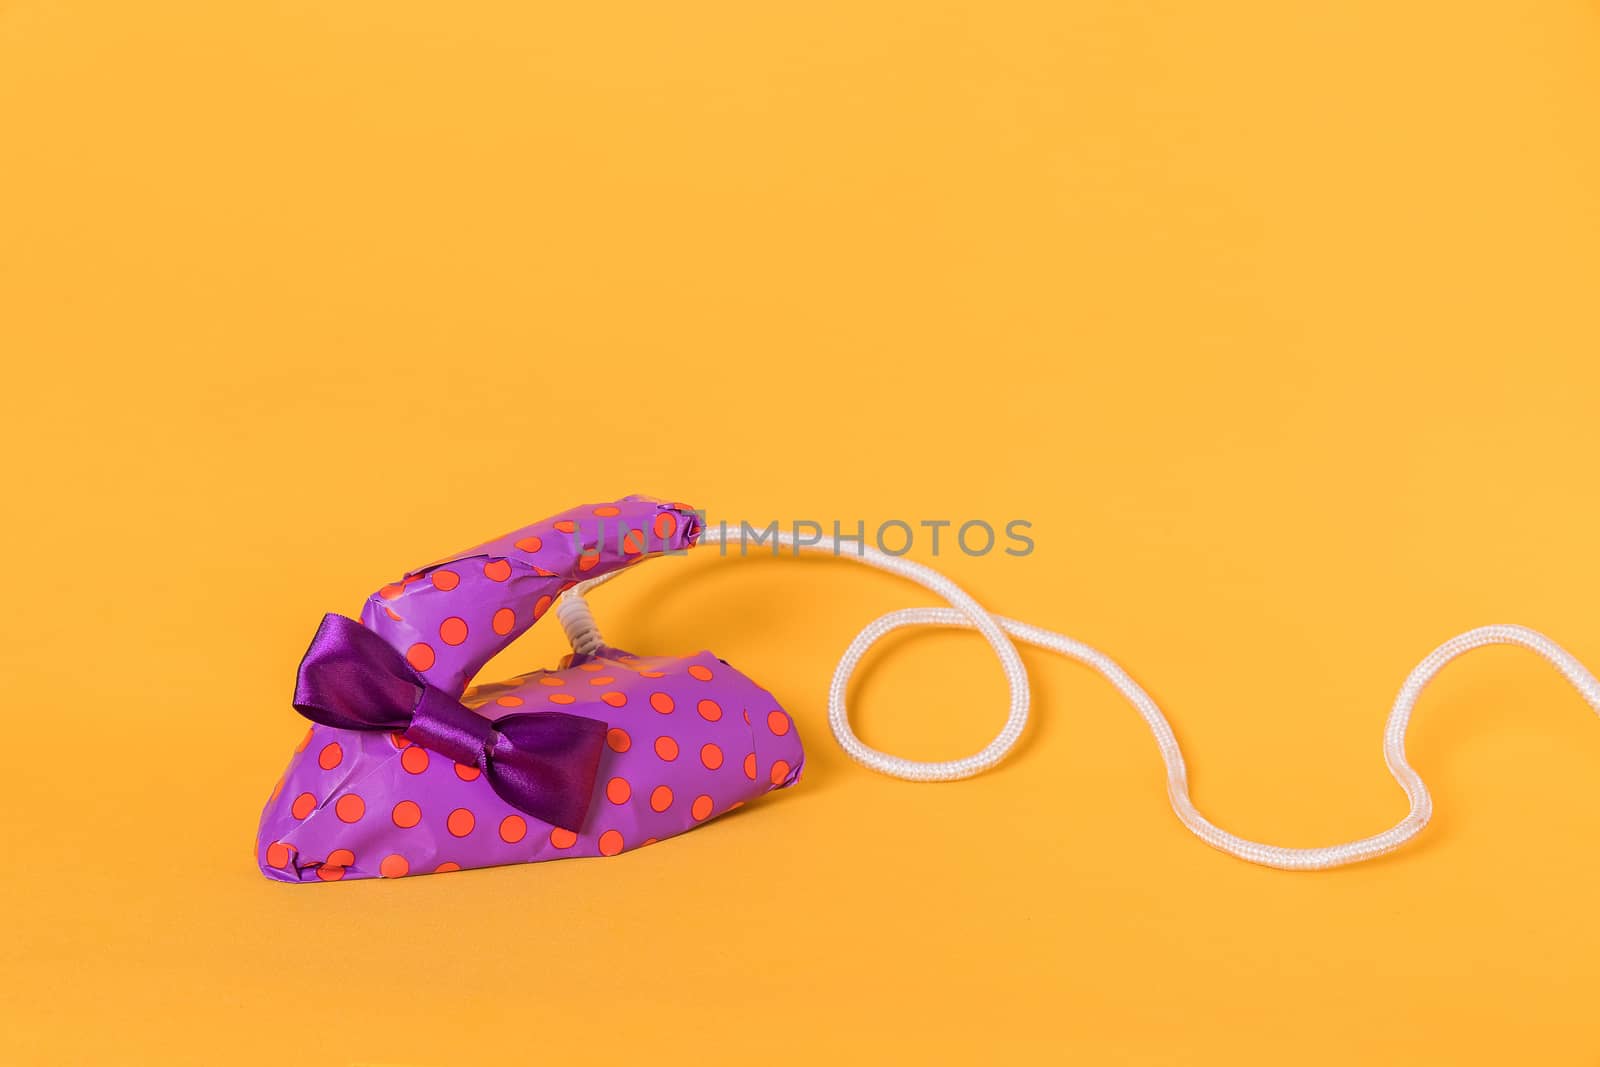 Iron wrapped in purple gift paper on an orange background by JRPazos